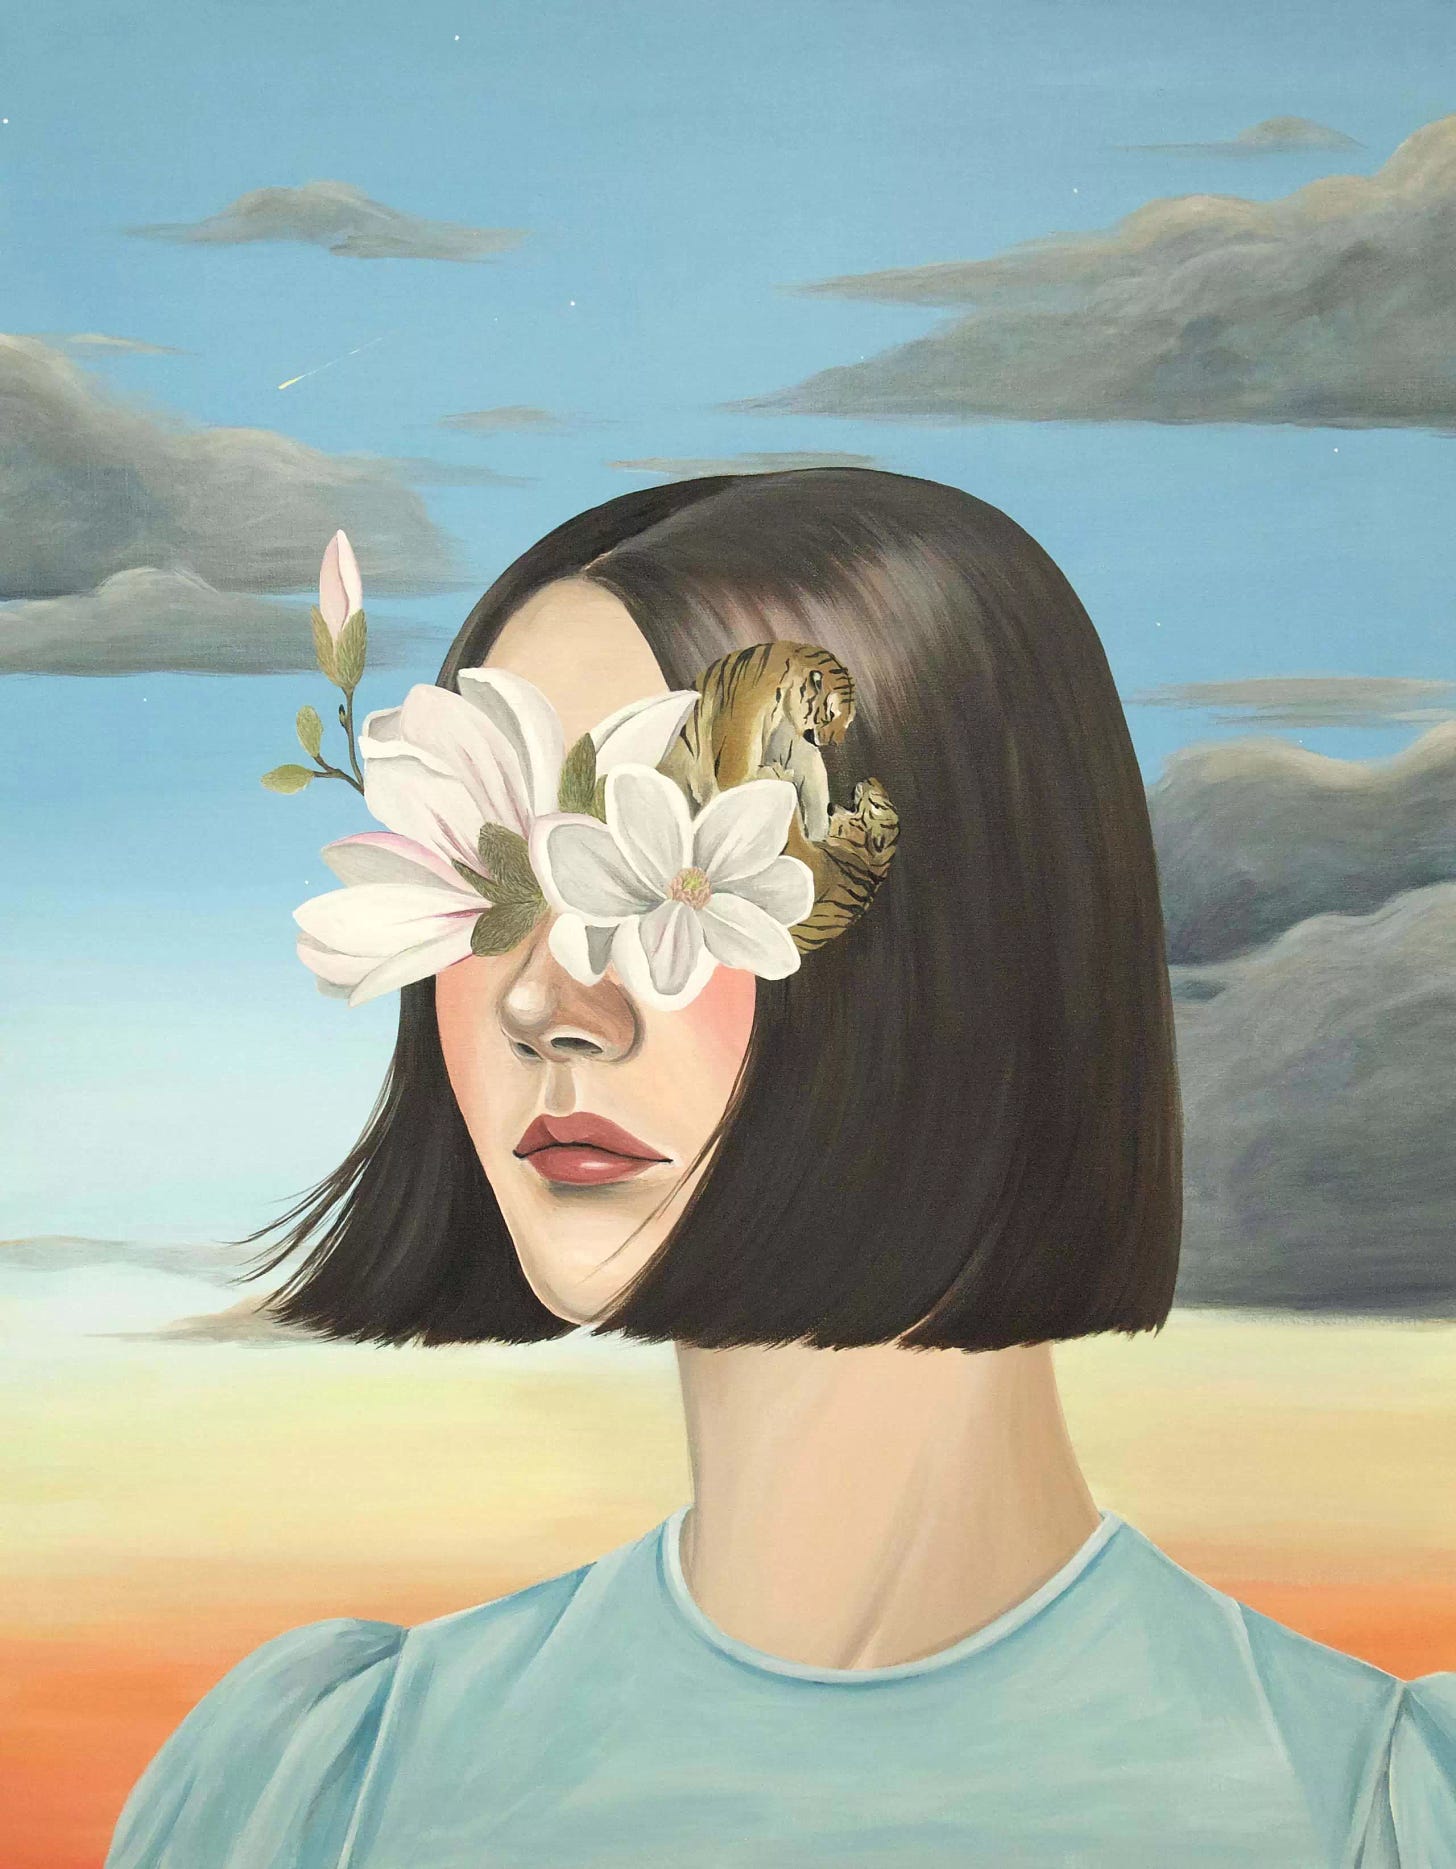 Mariko Enomoto painting. Woman with short dark hair. Instead of eyes she has flowers and tigers painted on